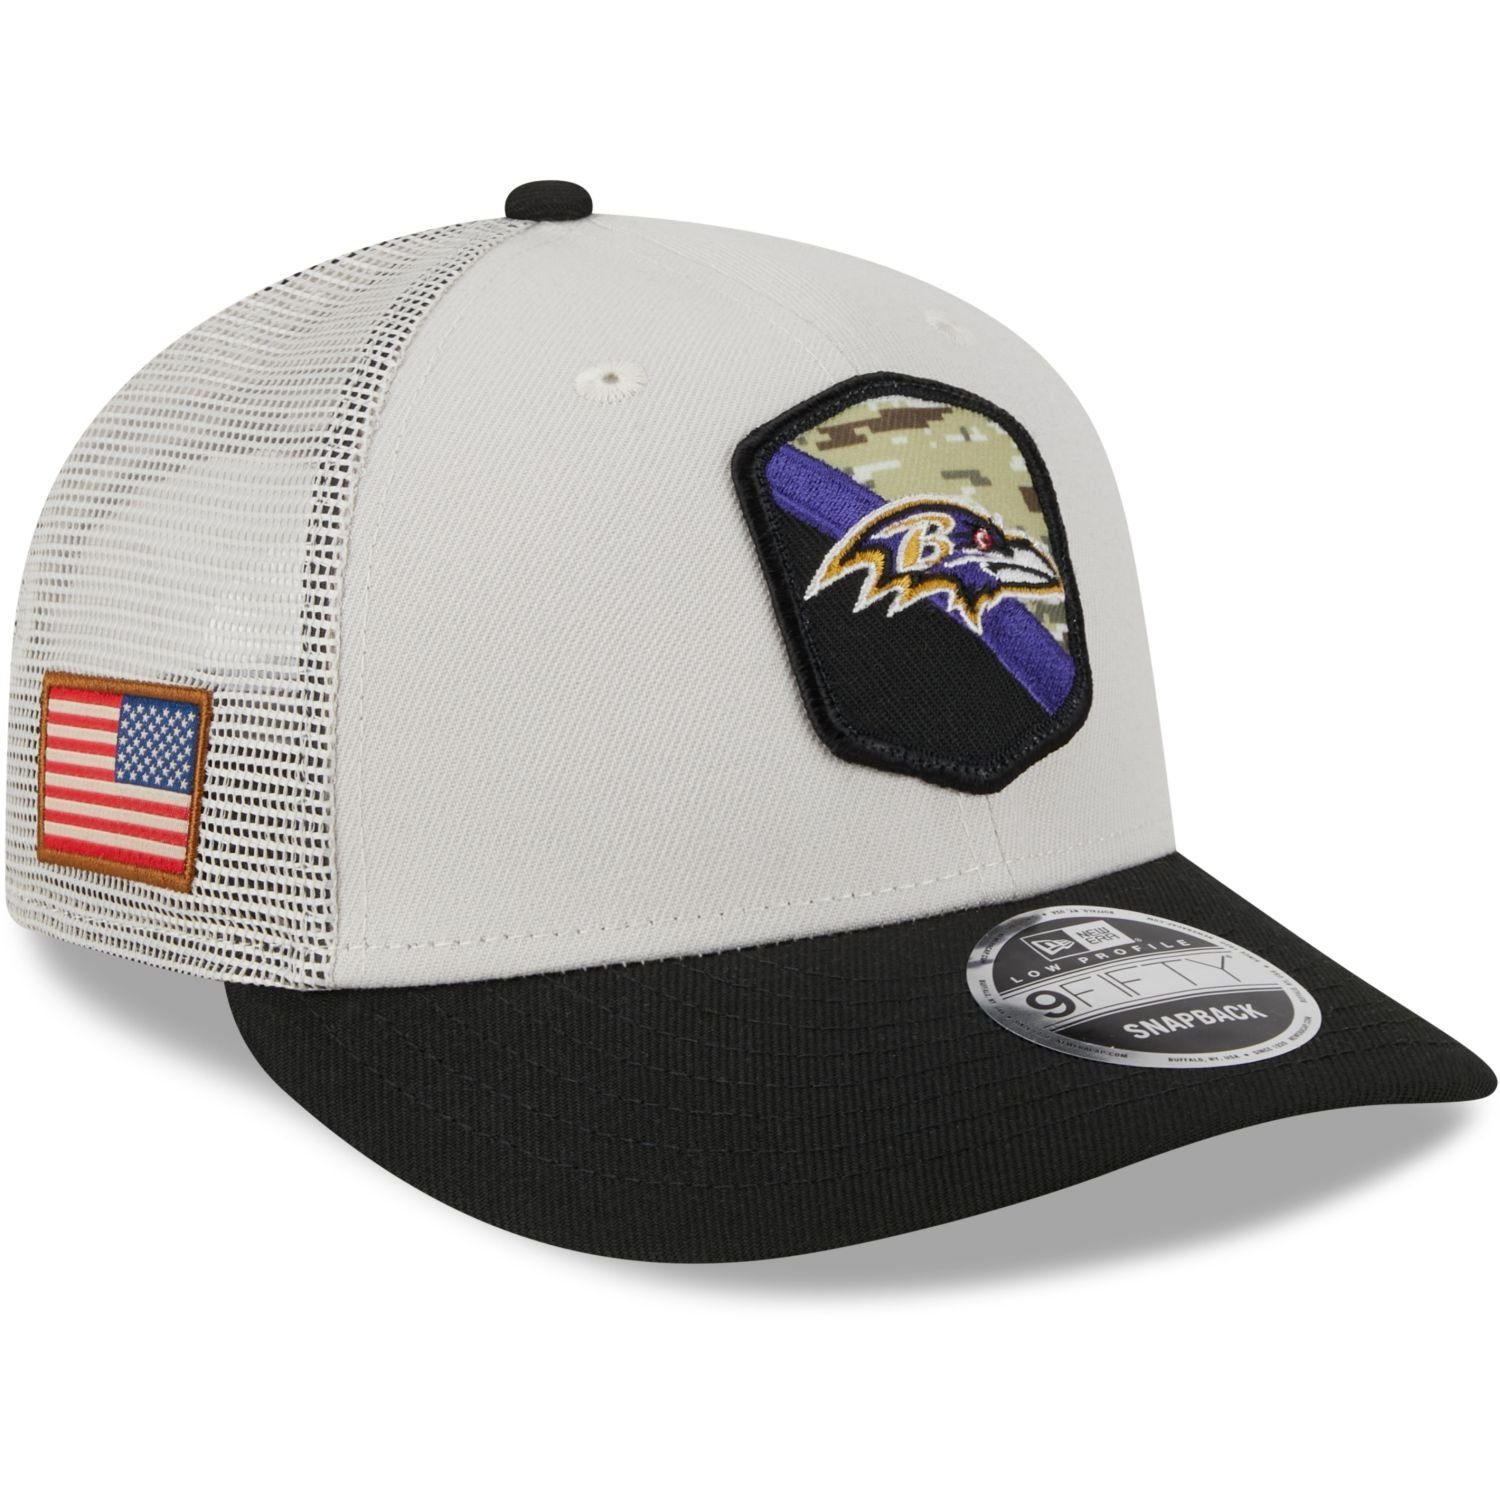 New Era Snapback Cap 9Fifty Low Profile Snap NFL Salute to Service Baltimore Ravens